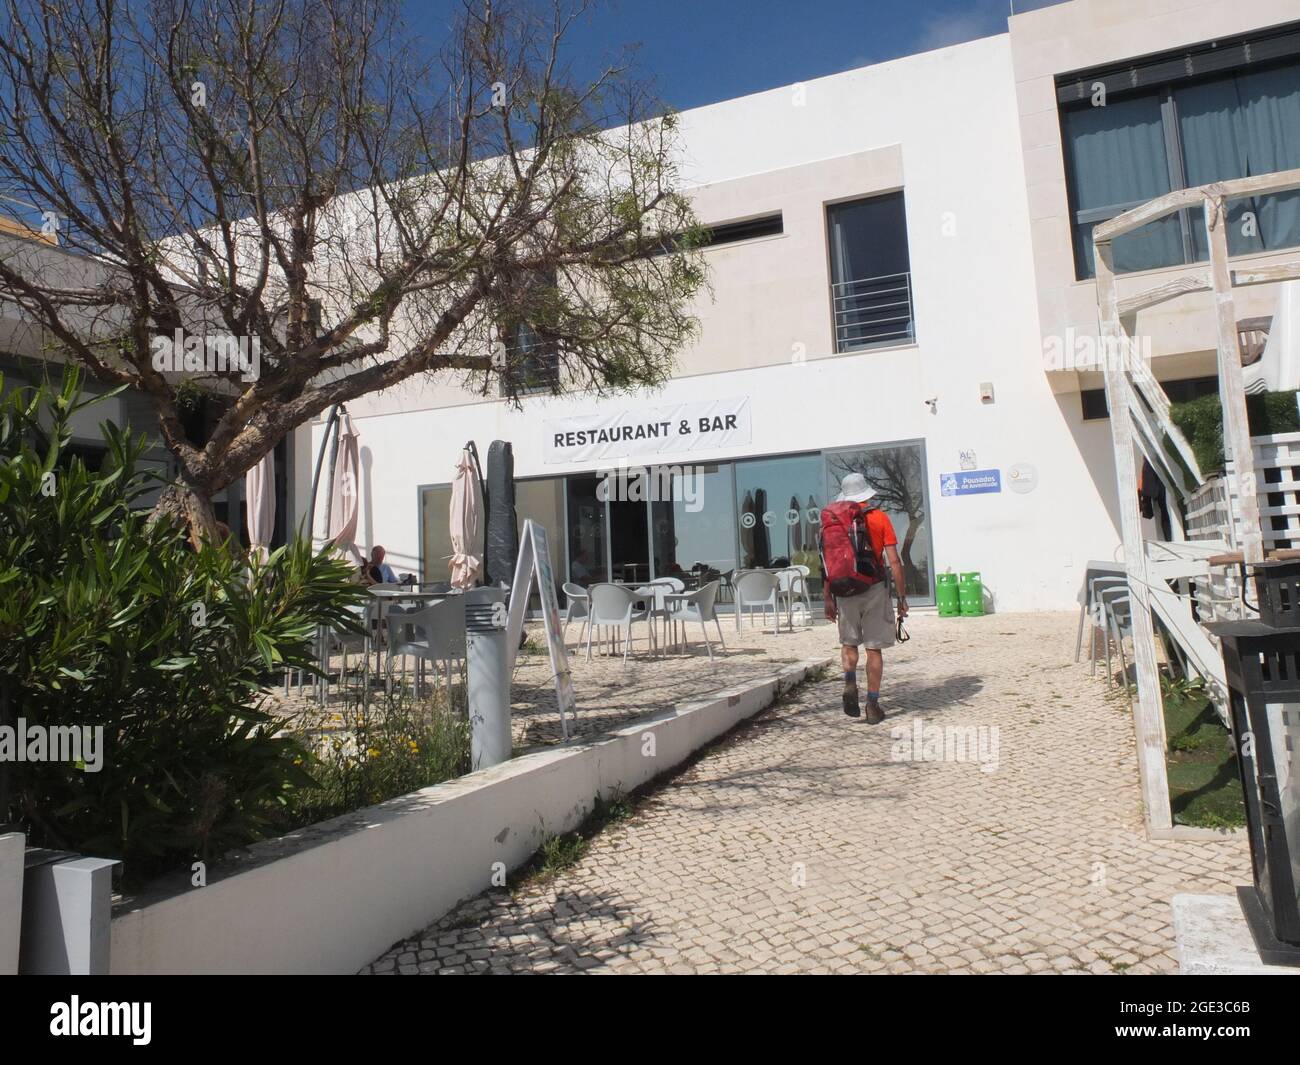 Walker arriving at a youth hostel, Arrifana, Algarve, southern Portugal Stock Photo